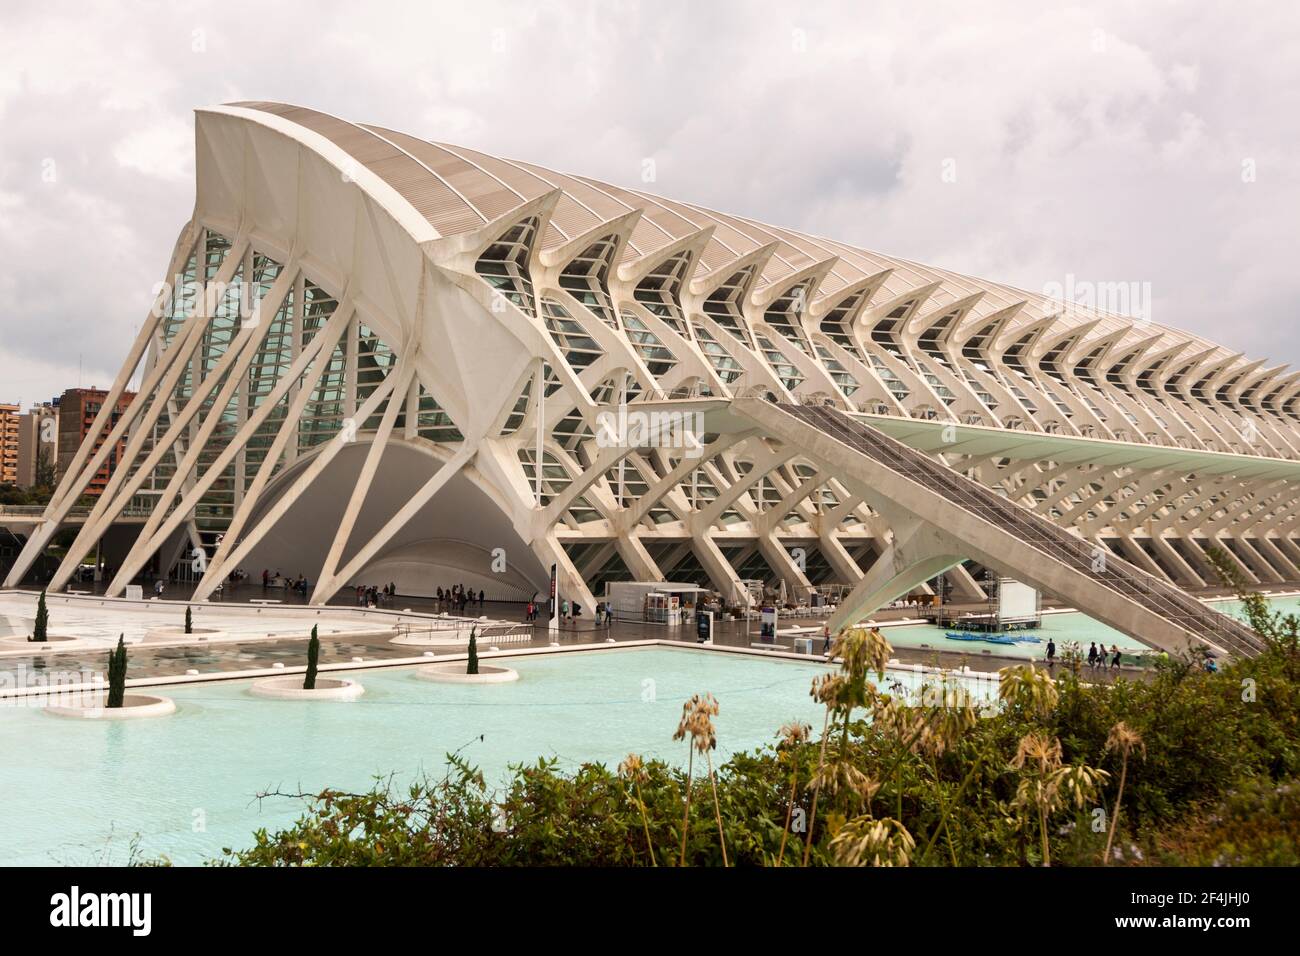 City of Arts and Sciences. Oceanographic, hemispheric, umbracle, palace of the arts, science museum, agora. Valencia. Spain, Europe. Stock Photo